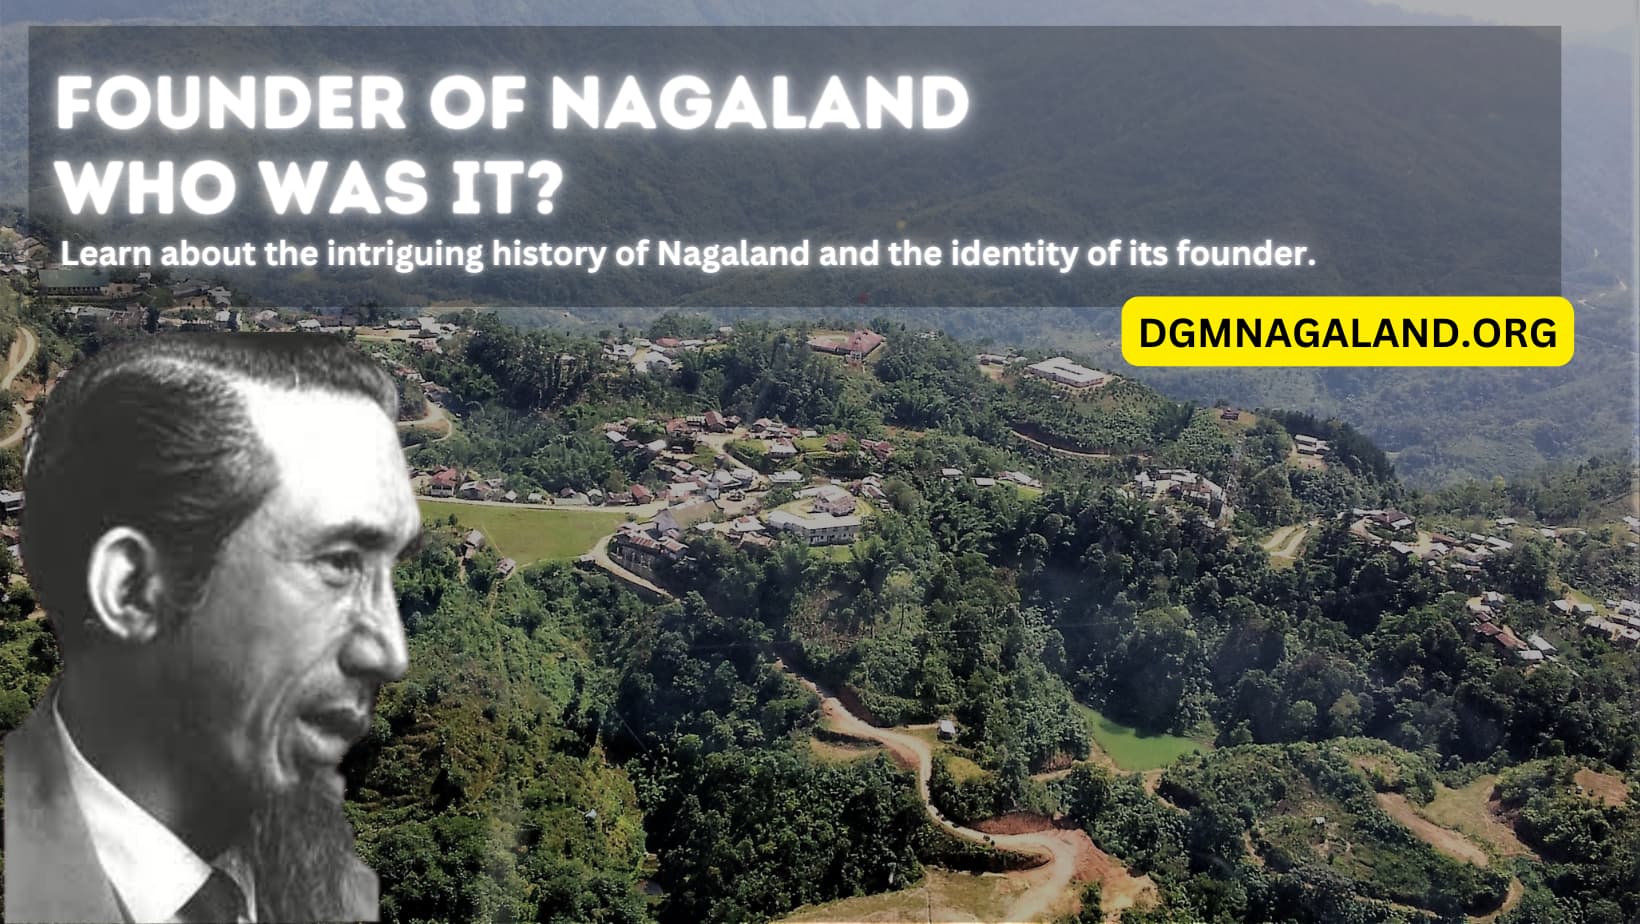 Who is the founder of Nagaland?